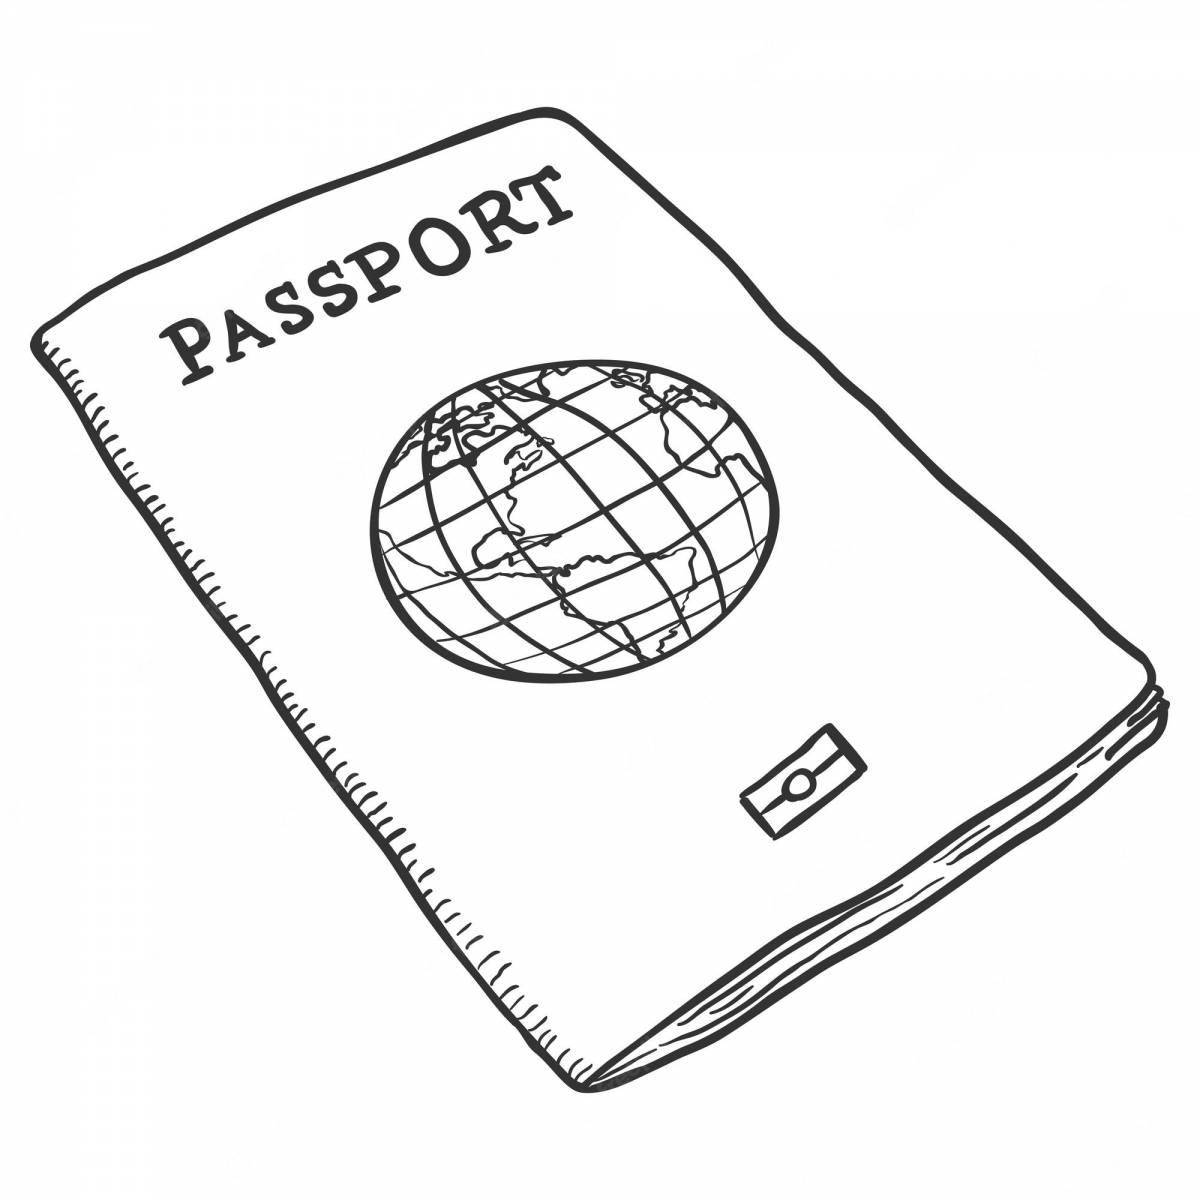 Colourful passport coloring for little historians